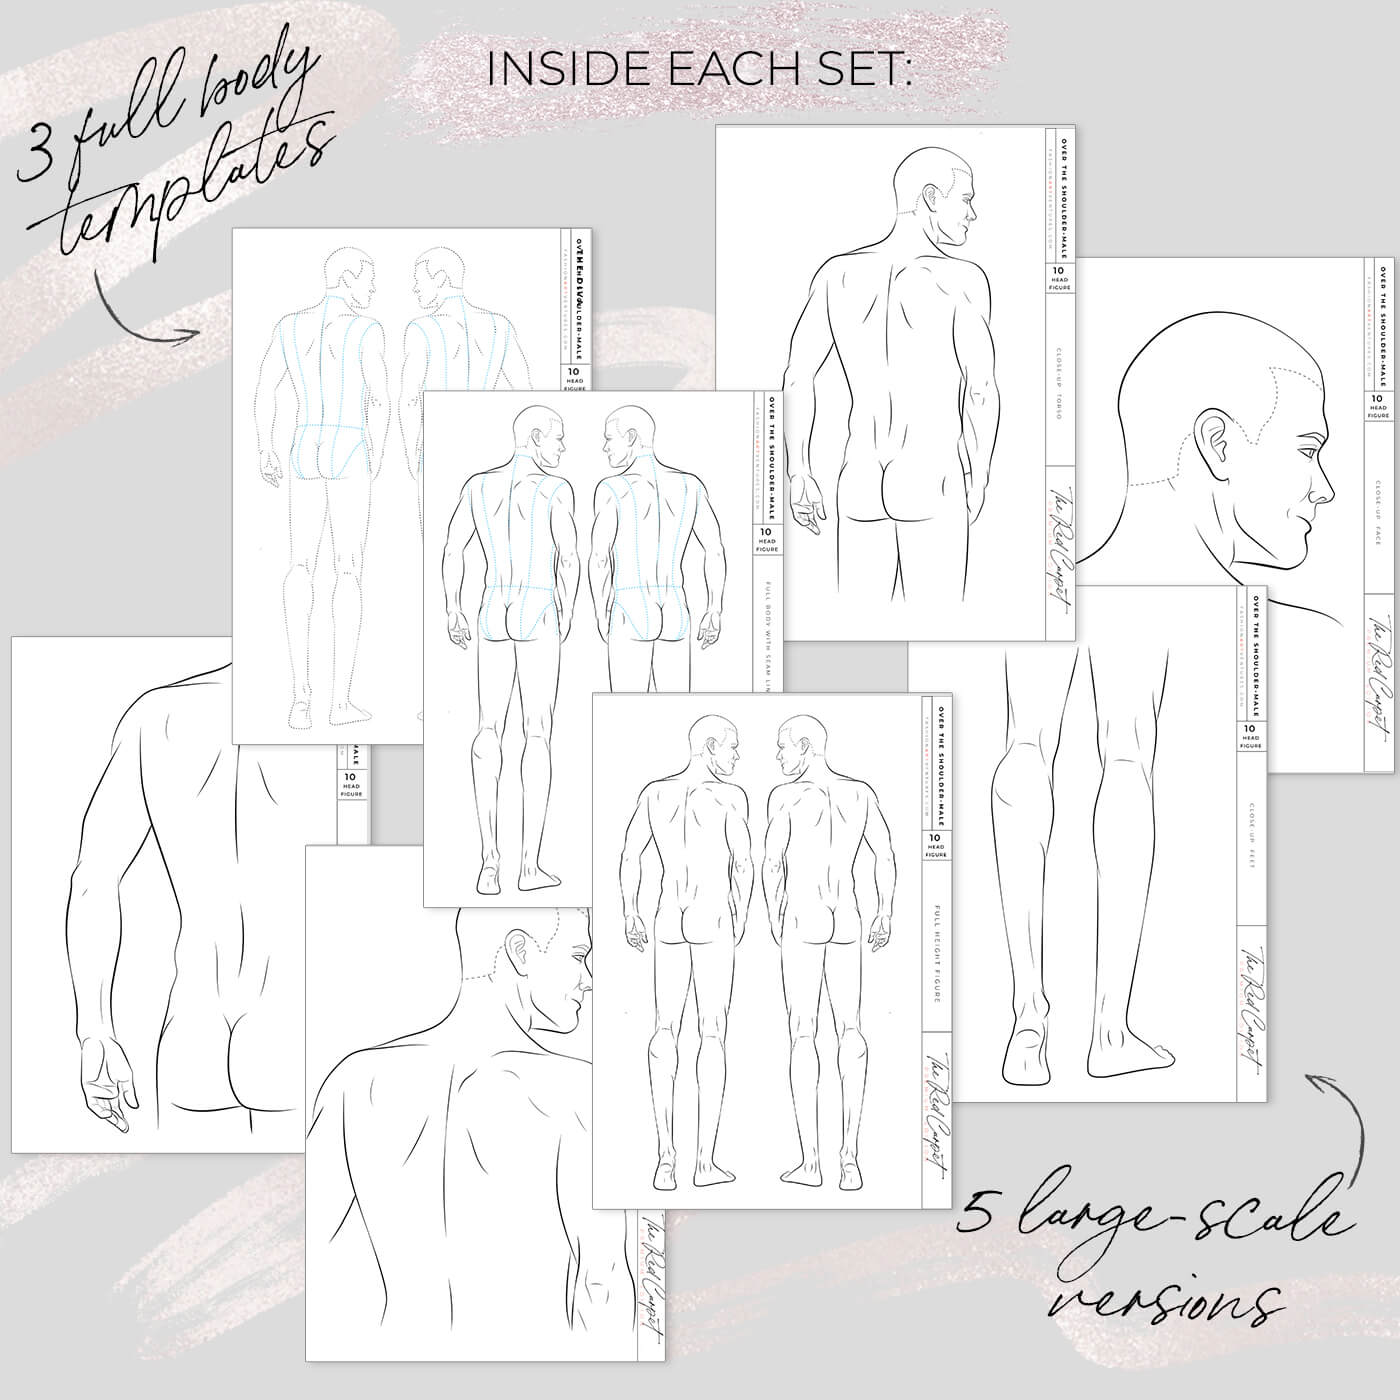 male body templates for designing clothes